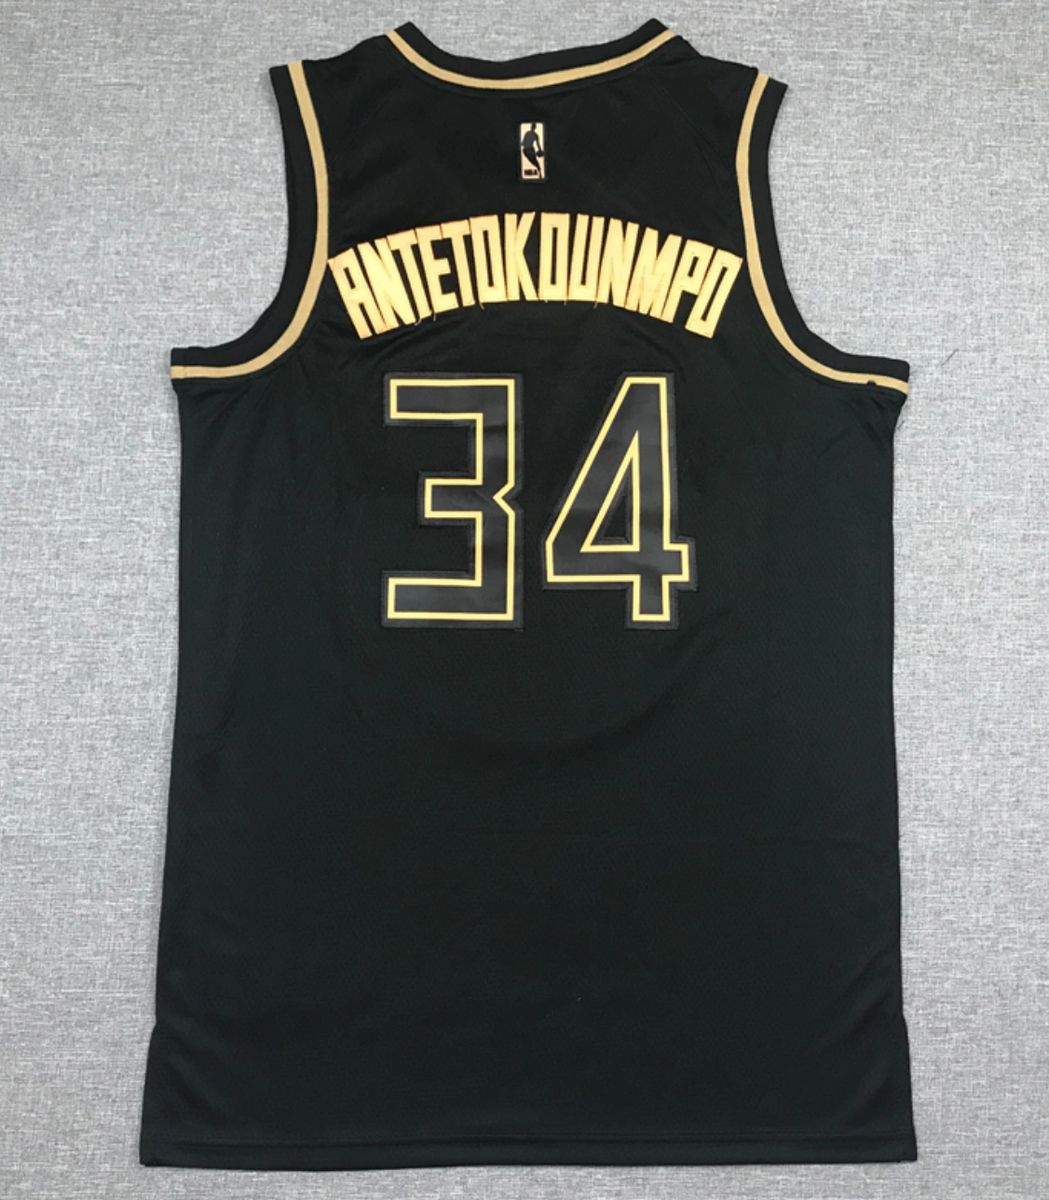 Giannis Antetokounmpo Black and Gold Jersey